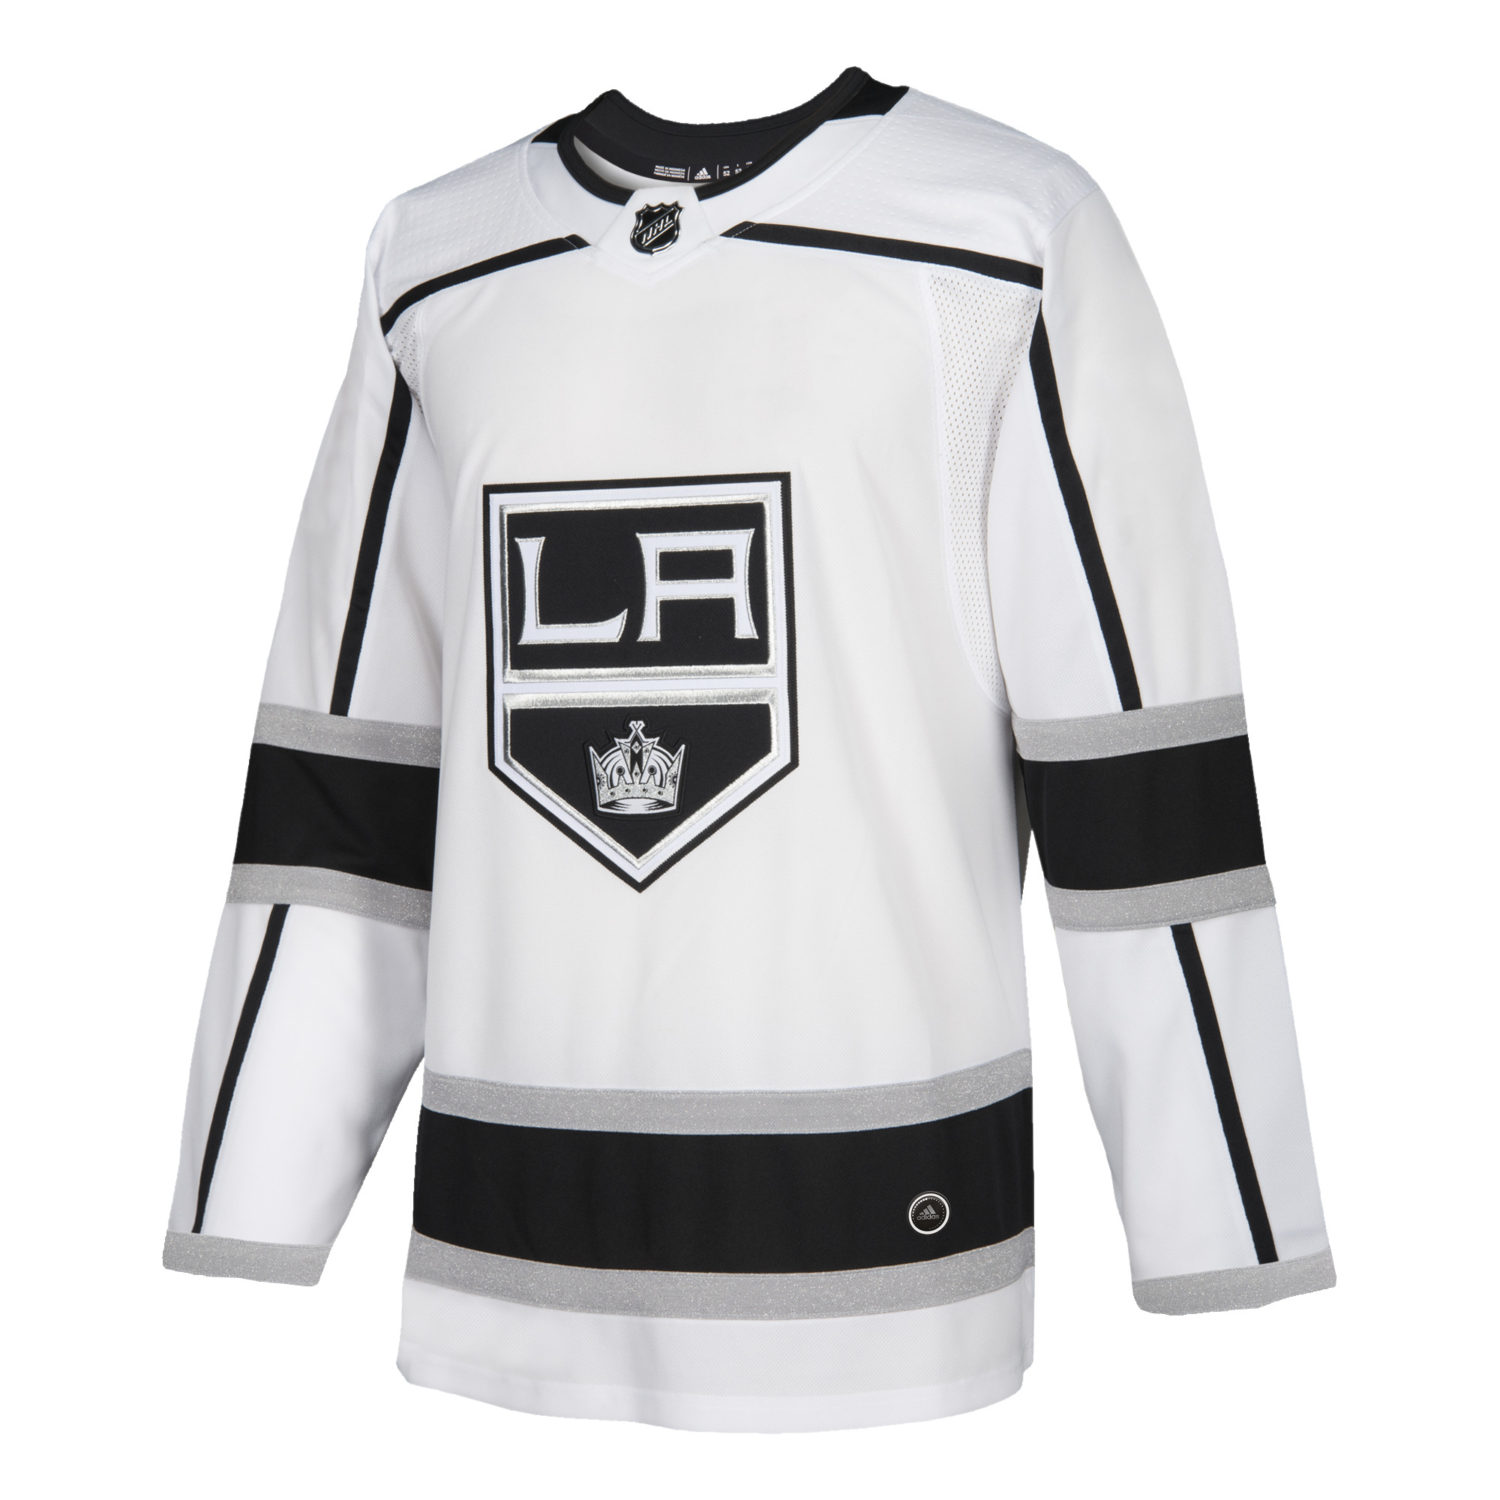 2017 nhl jersey changes